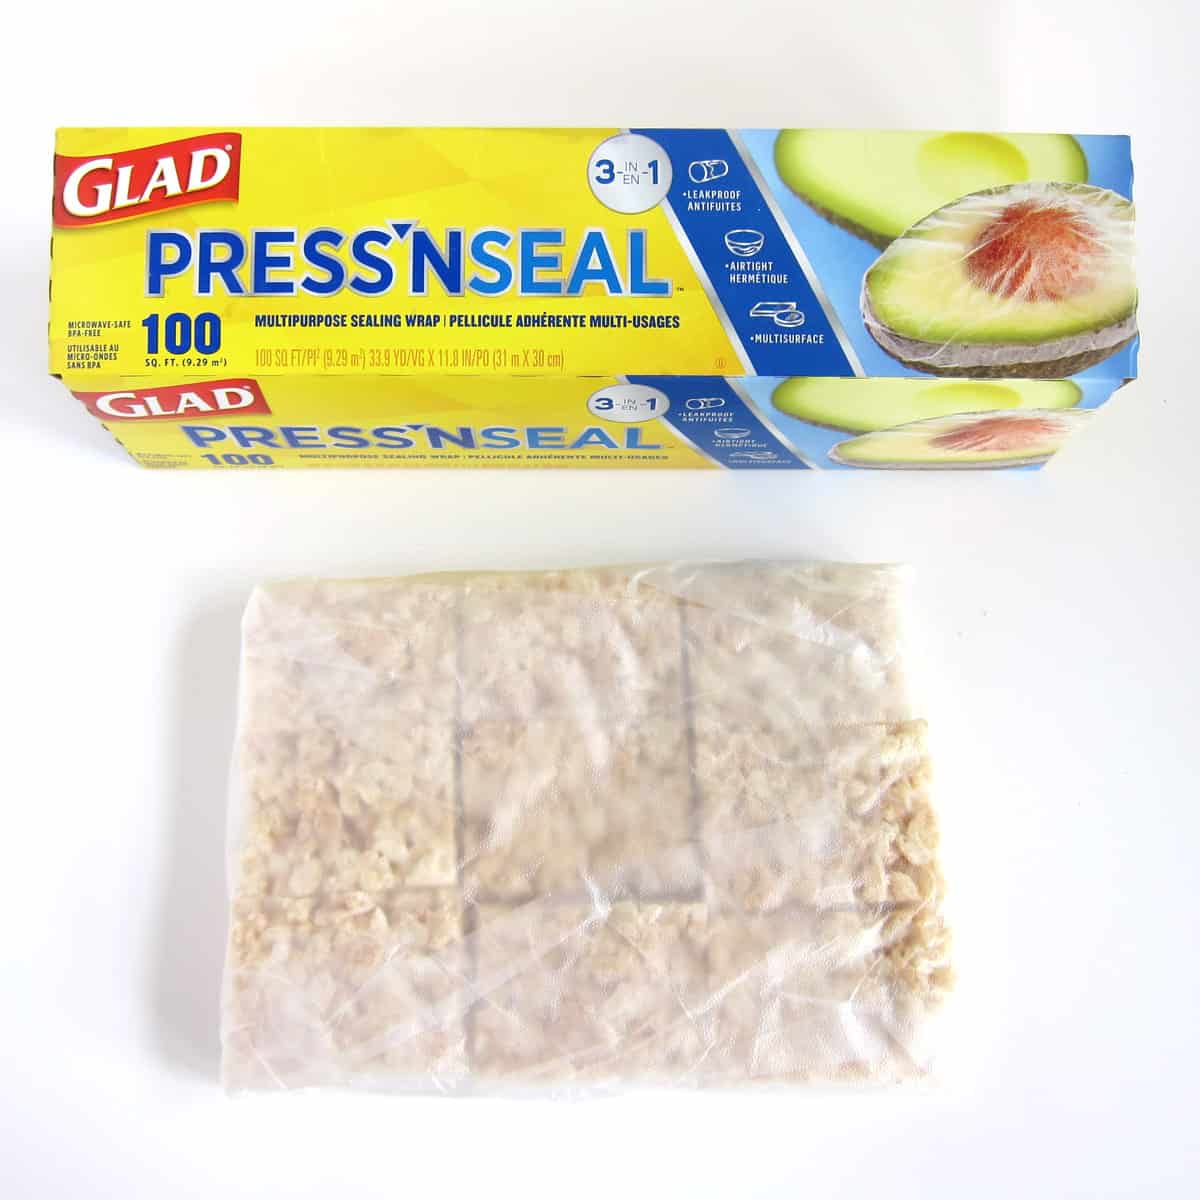 Rice crispy treats wrapped in Glad Press'n Seal.